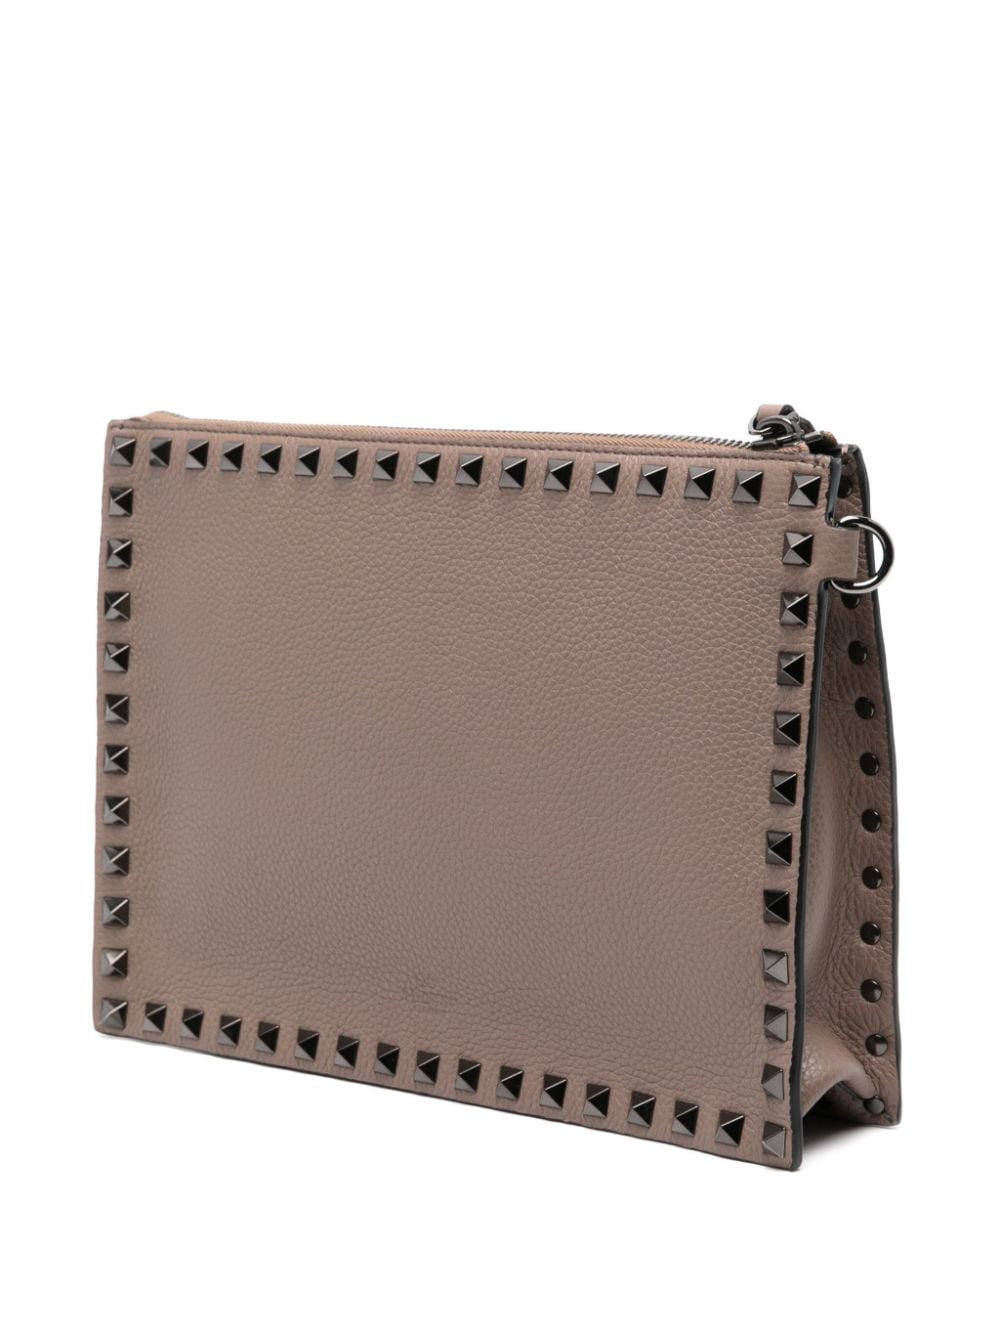 Shop Valentino Rockstud Leather Clutch Bag In Nude